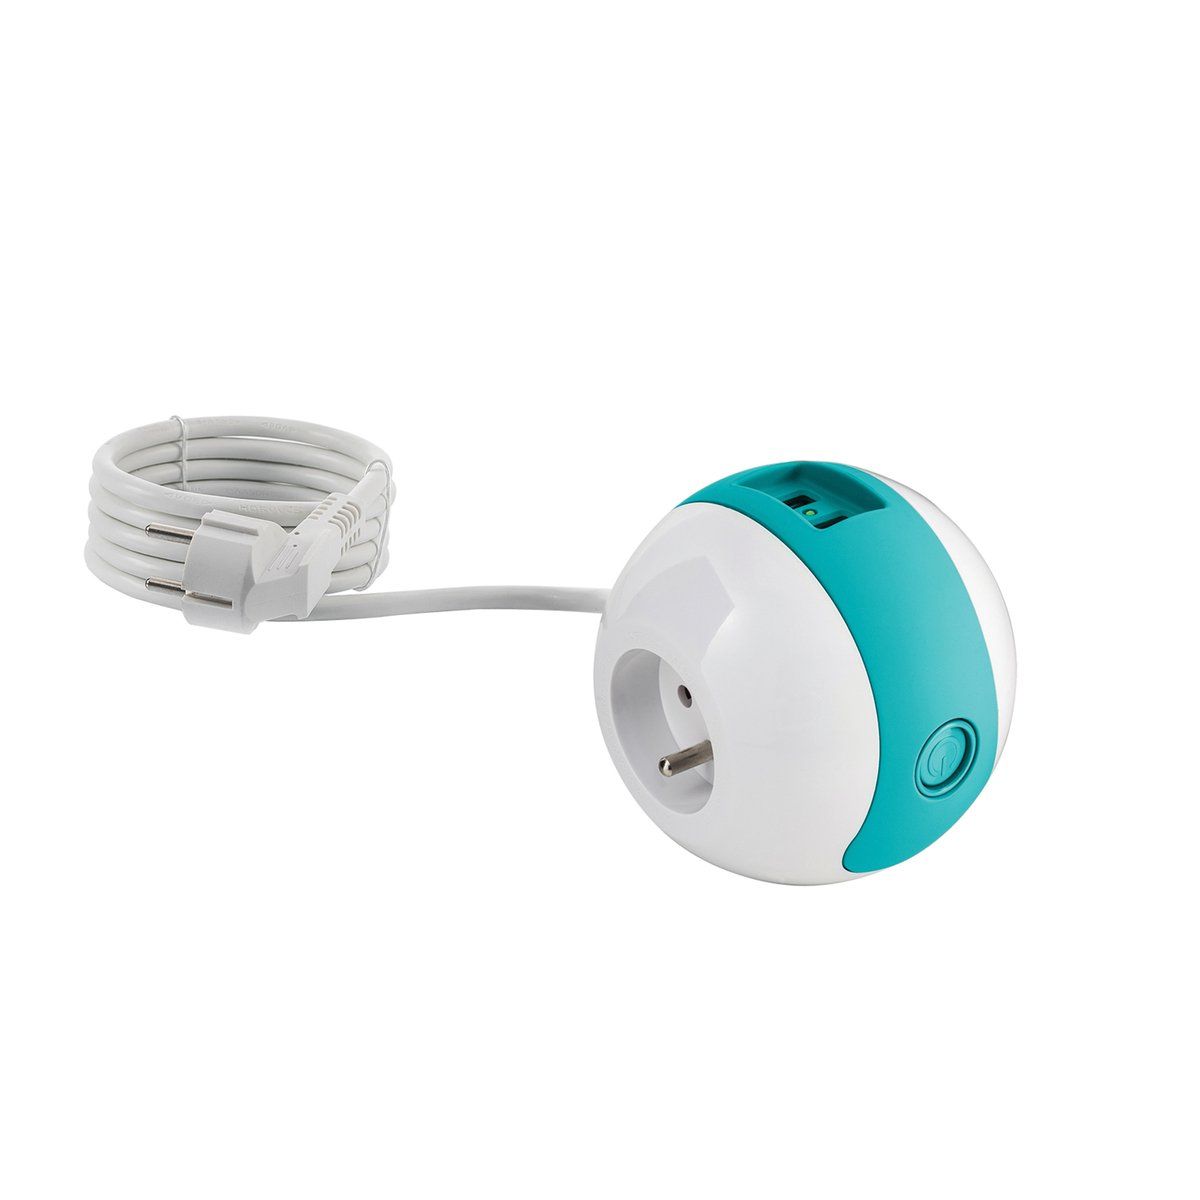 Multiprise multimédia USB (2x16A + 1x6A) turquoise